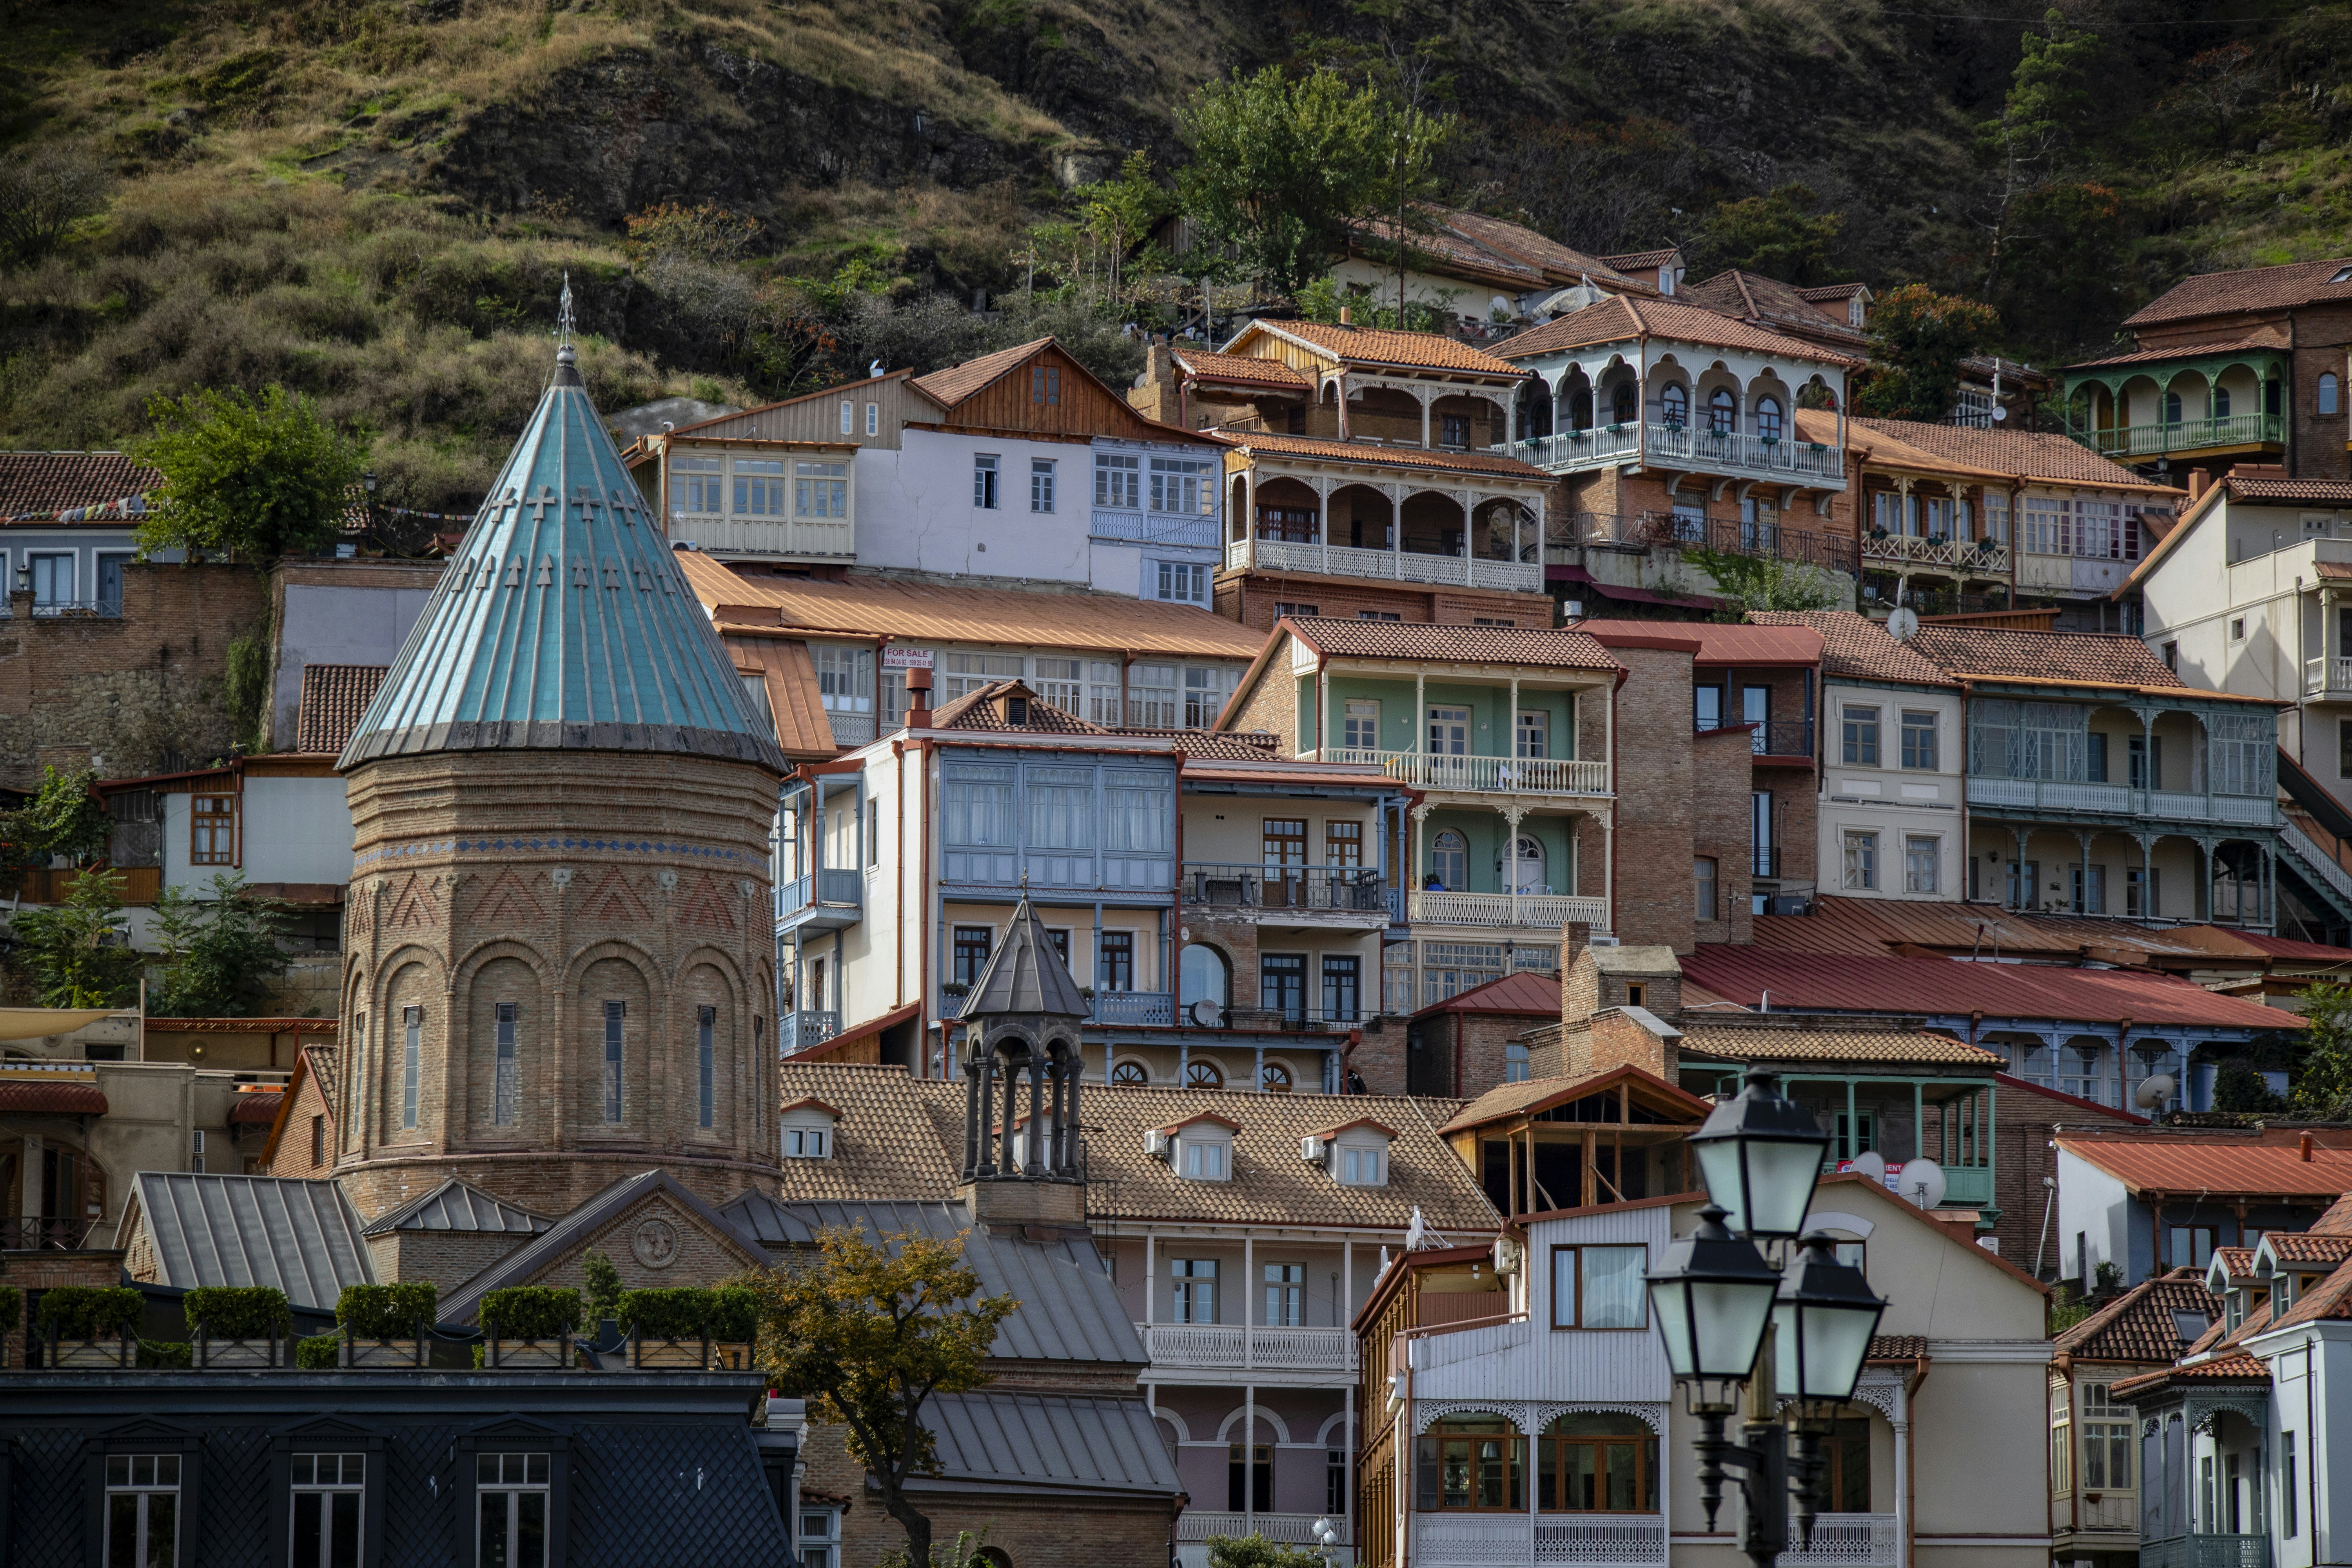 Historically, Tbilisi has been home to people of multiple cultural, ethnic, and religious backgrounds, though it is currently overwhelmingly Eastern Orthodox Christian.